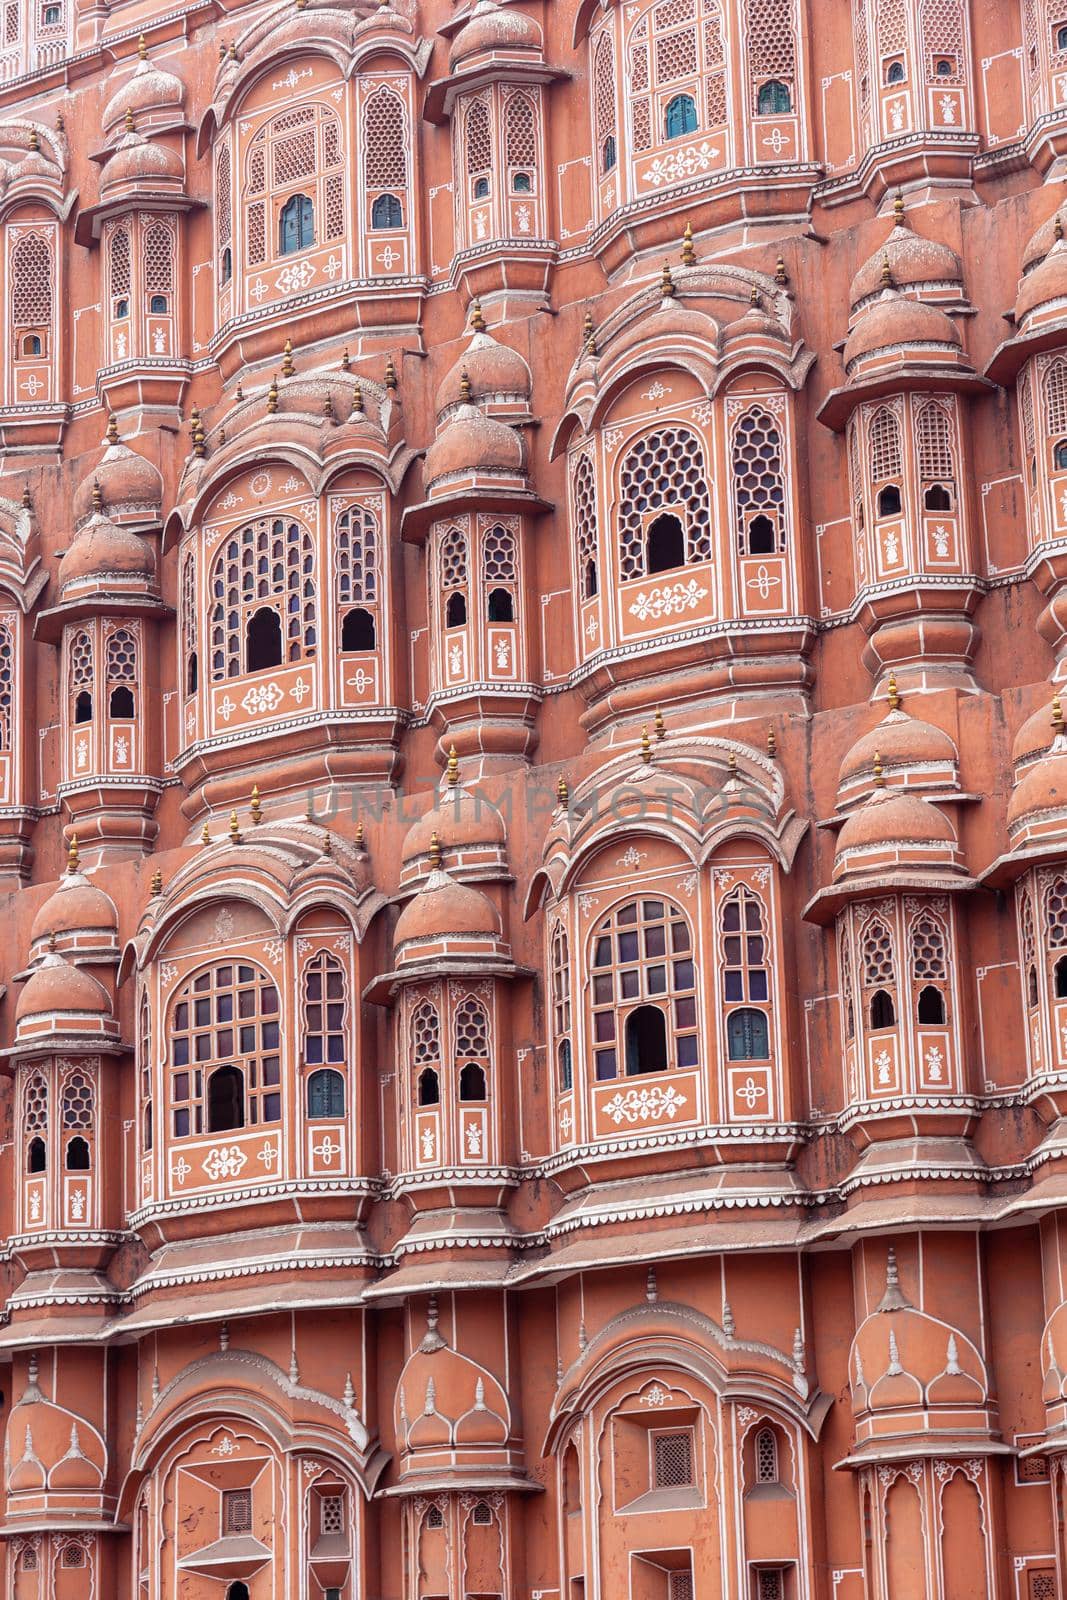 Hawa Mahal, Palace of Winds in Jaipur, India by oliverfoerstner